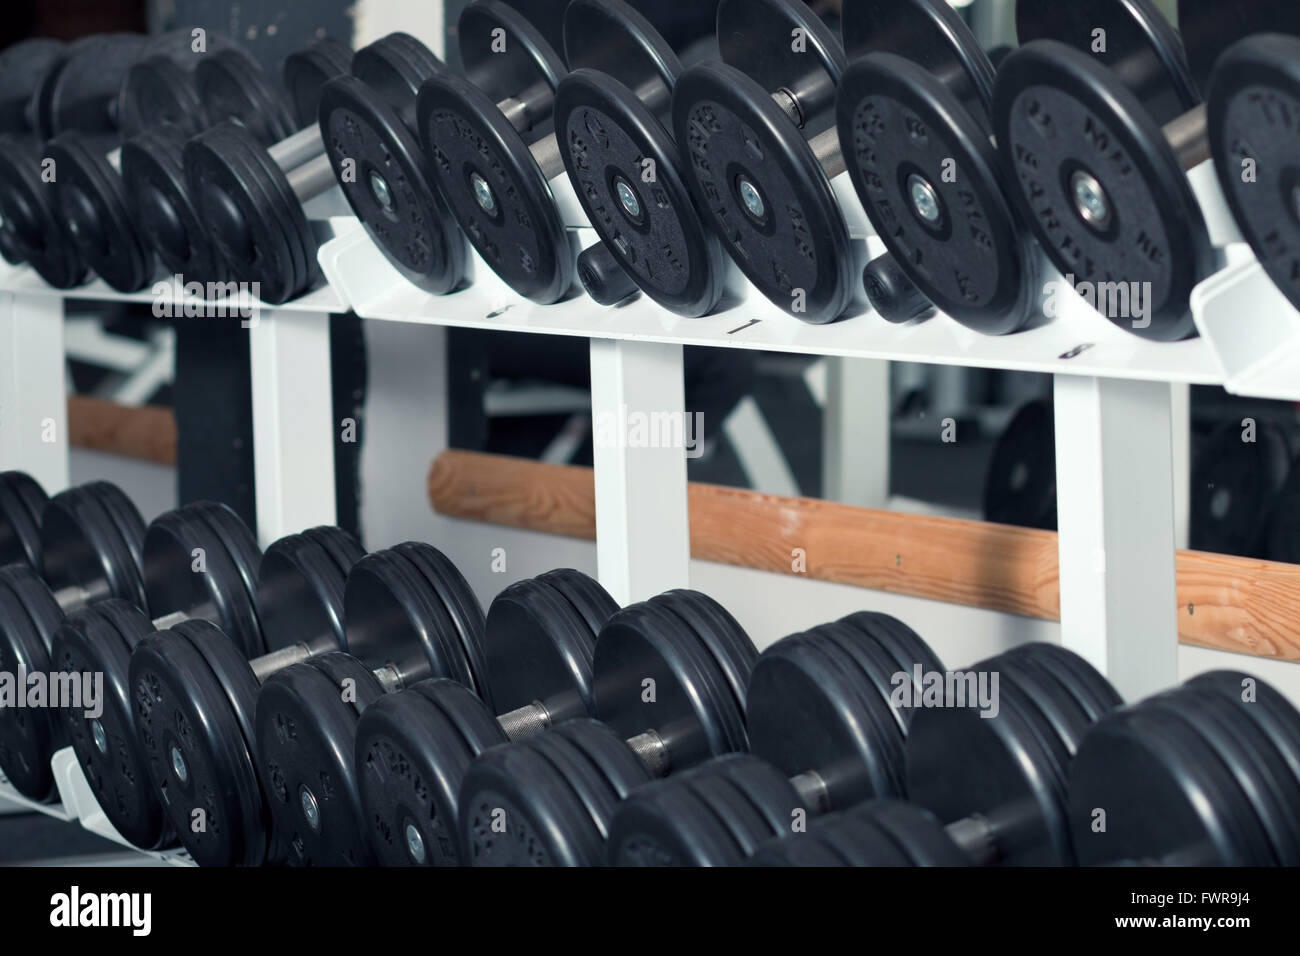 Close-up view of barbells organized in row on rack at gym Stock Photo